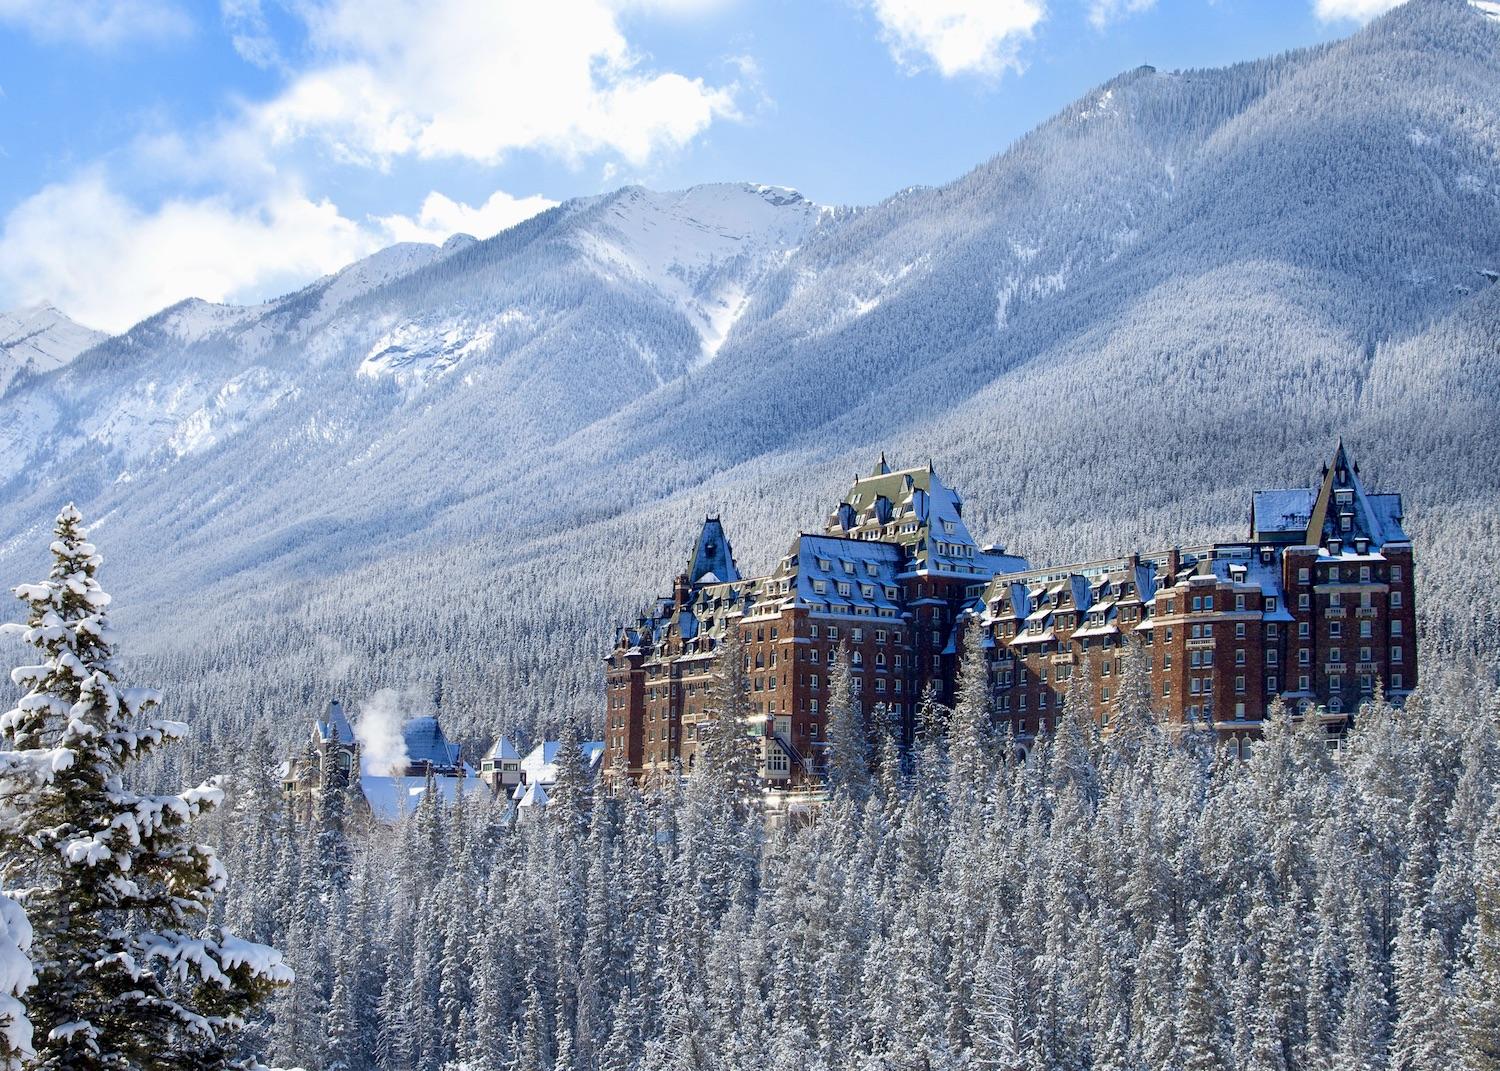 The iconic Fairmont Banff Springs hotel was built by the Canadian Pacific Railway and opened in 1888.